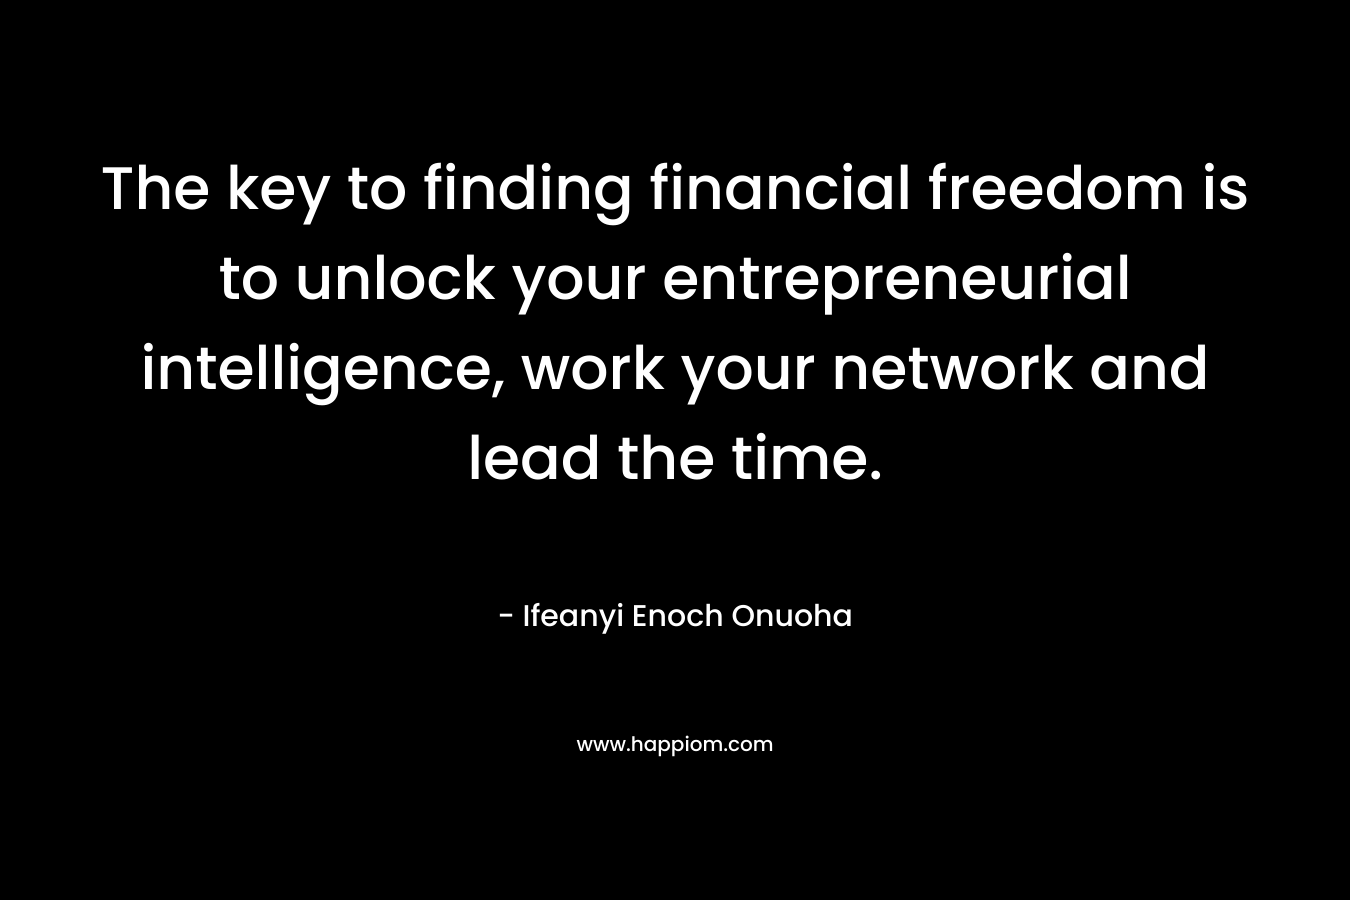 The key to finding financial freedom is to unlock your entrepreneurial intelligence, work your network and lead the time.